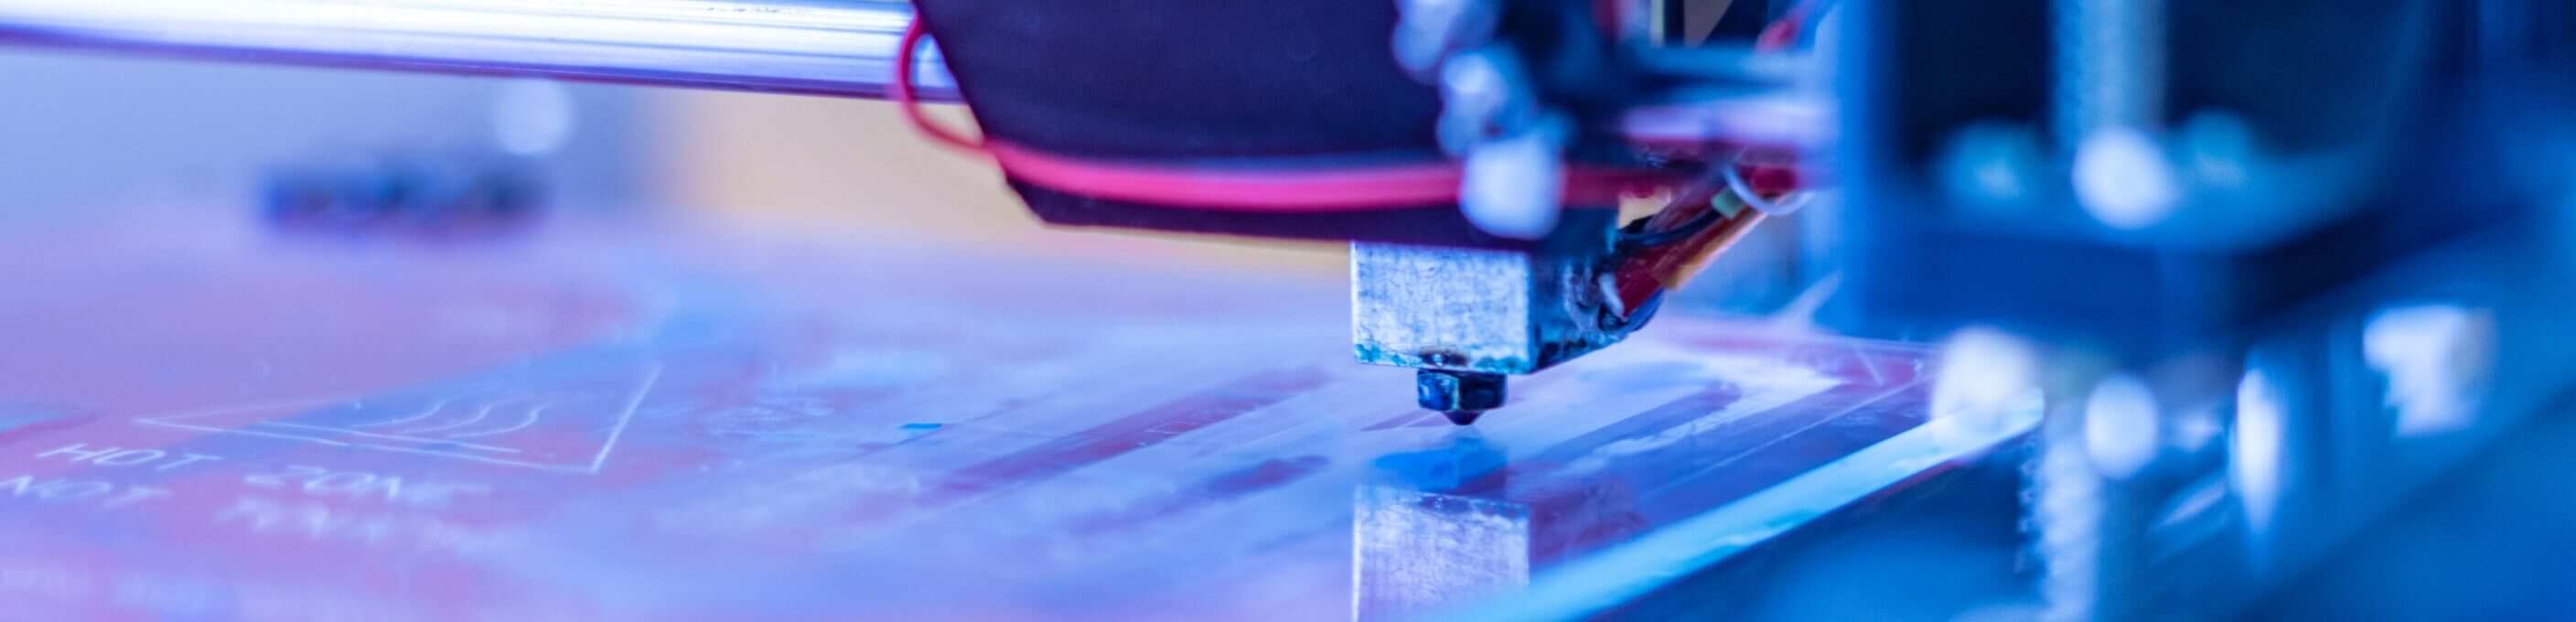 Closeup of a 3D printing machine with a blueish tint. 